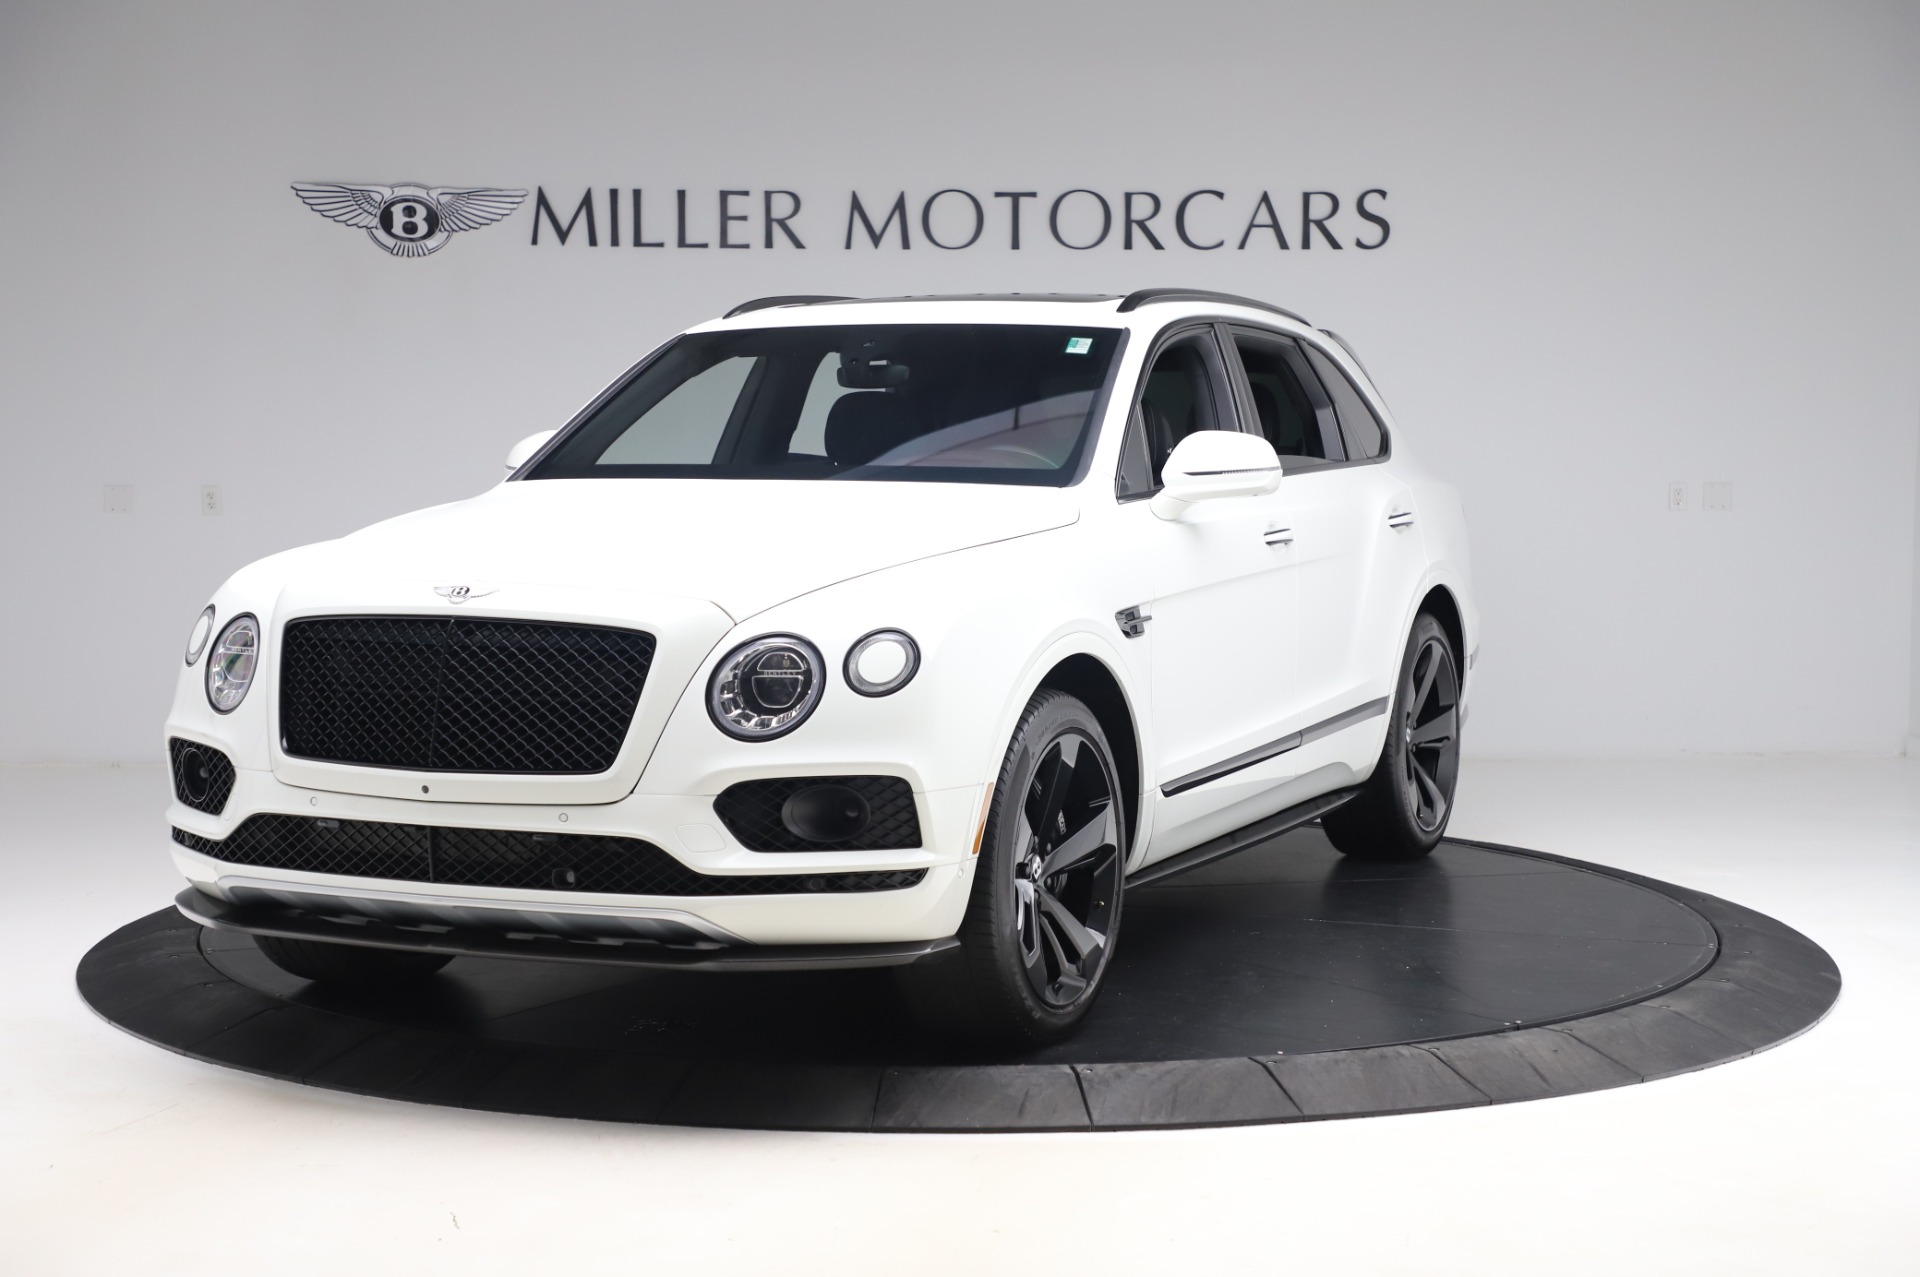 Used 2018 Bentley Bentayga Black Edition for sale Sold at Pagani of Greenwich in Greenwich CT 06830 1